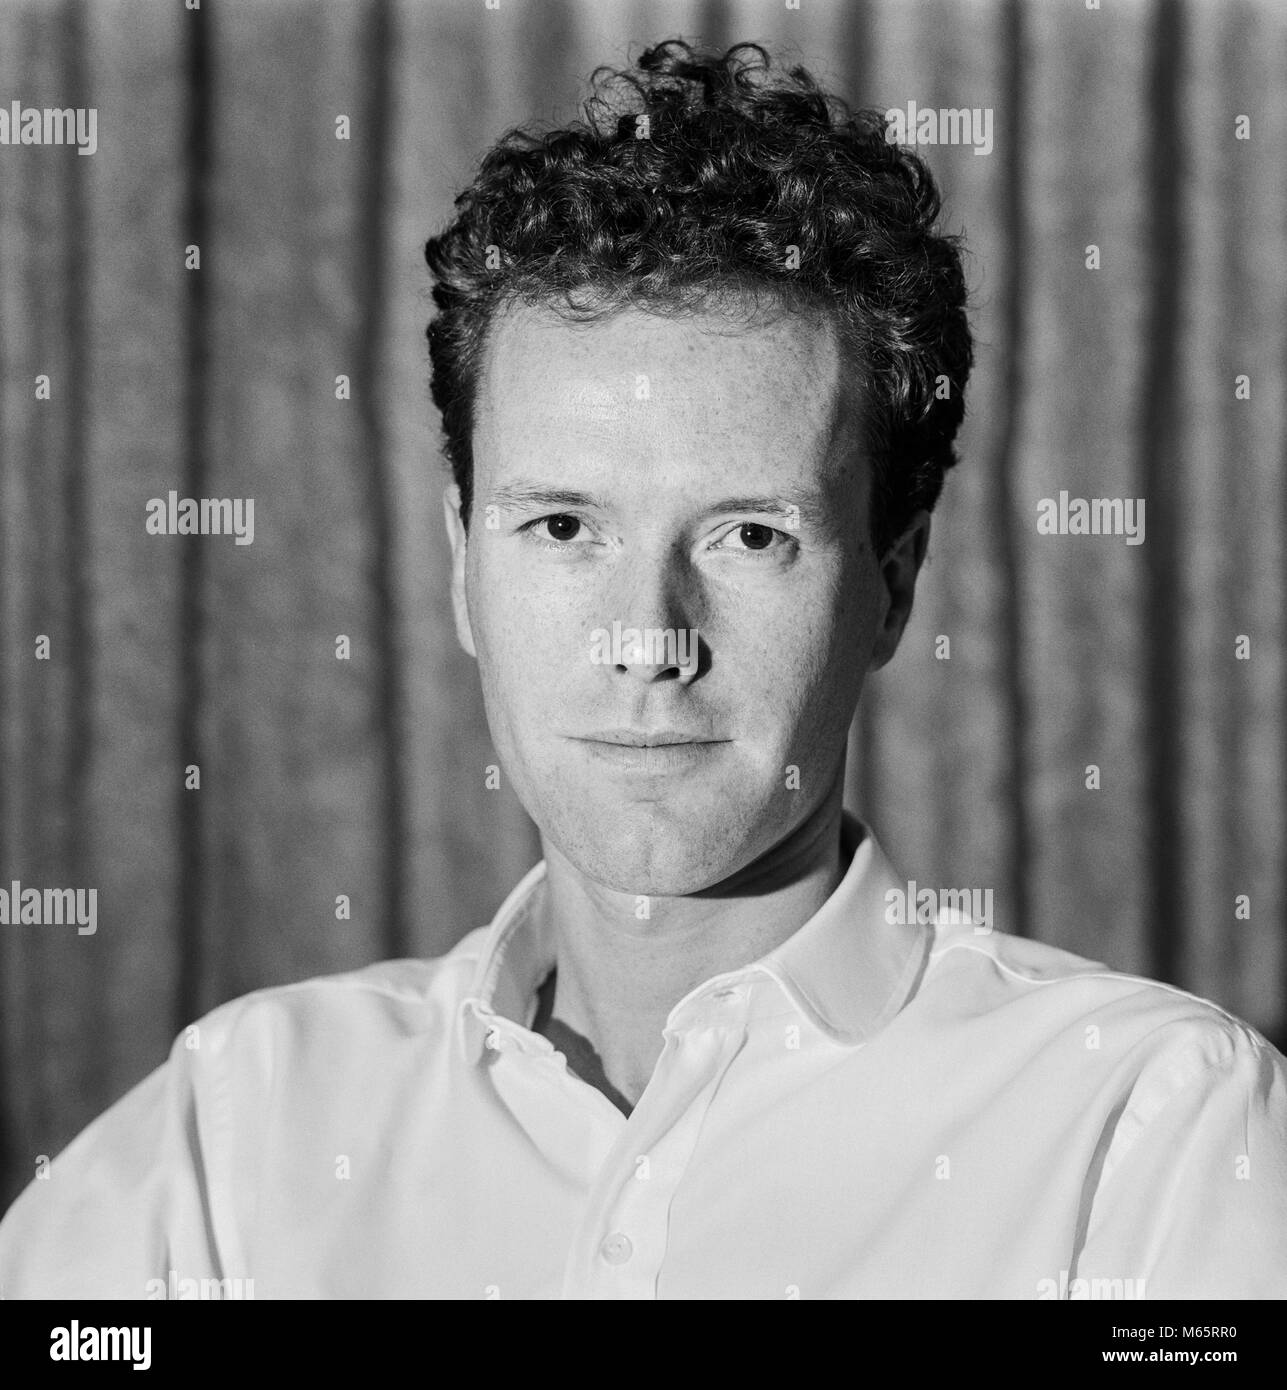 Edward St Aubyn, author, writer, novelist, journalist, He is the author of eight novels. In 2006, Mother's Milk was nominated for the Booker Prize, Archival photograph made on 6 January 1994 Stock Photo